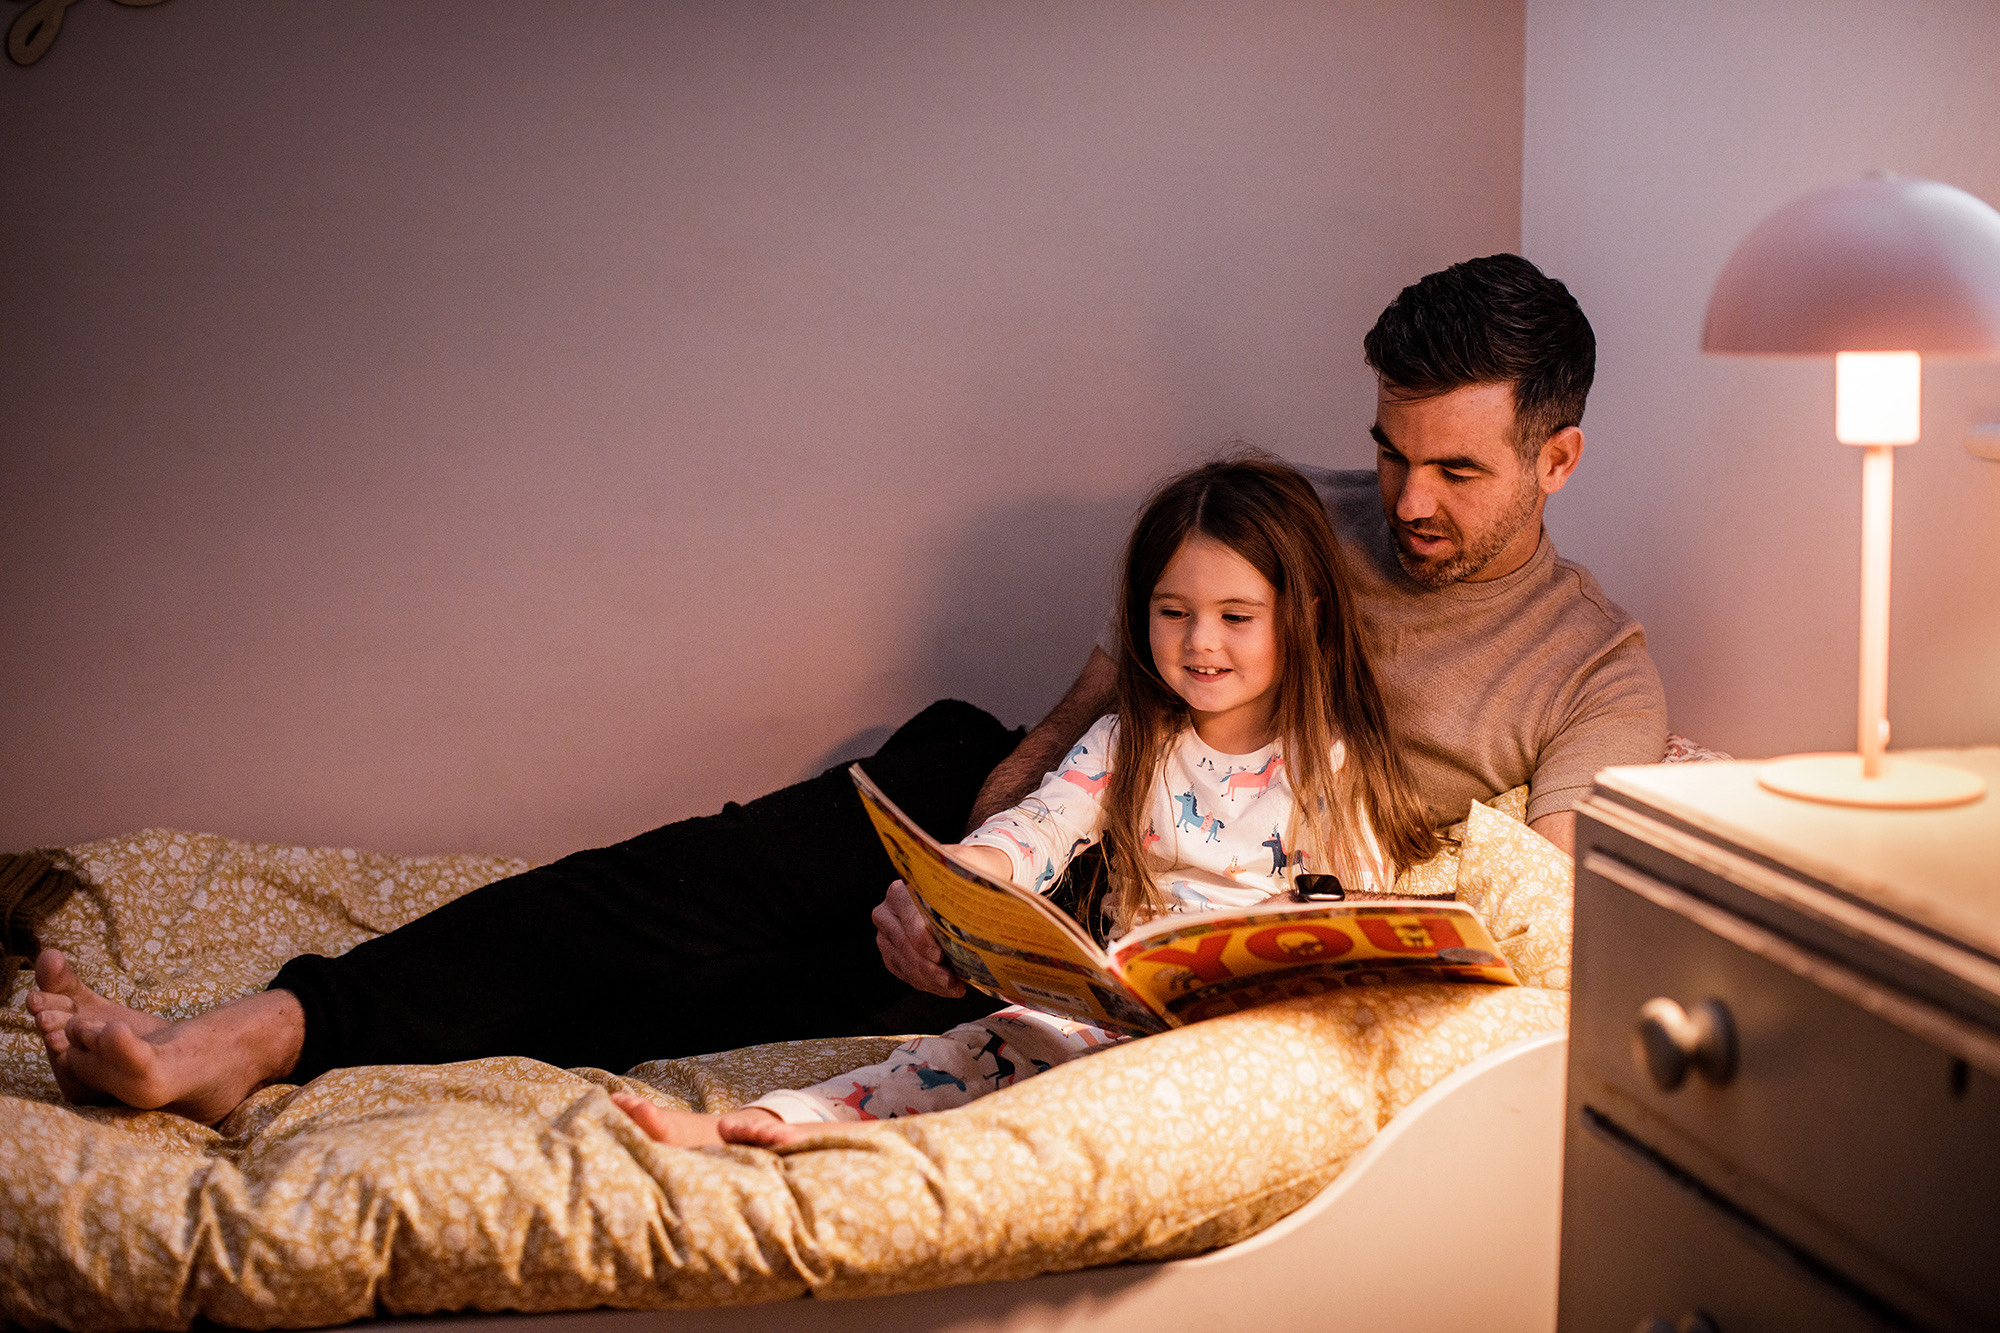 A father reads a story to his daughter in bed.